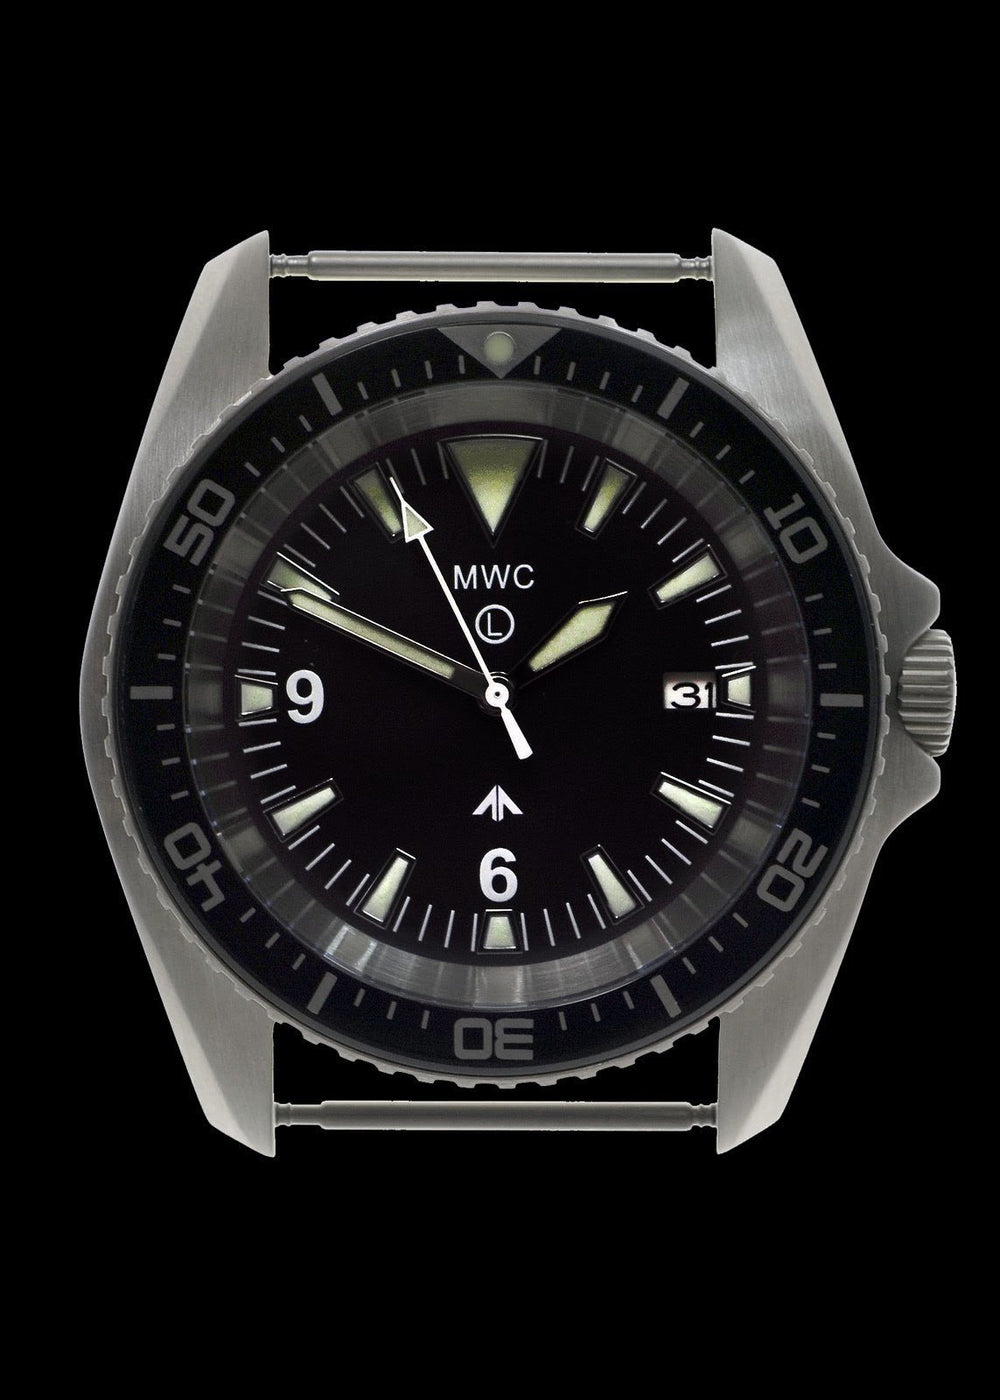 MWC Divers Watch - Military Divers Watch Stainless Steel (Automatic) 2019 Model With Sapphire Crystal and Ceramic Bezel